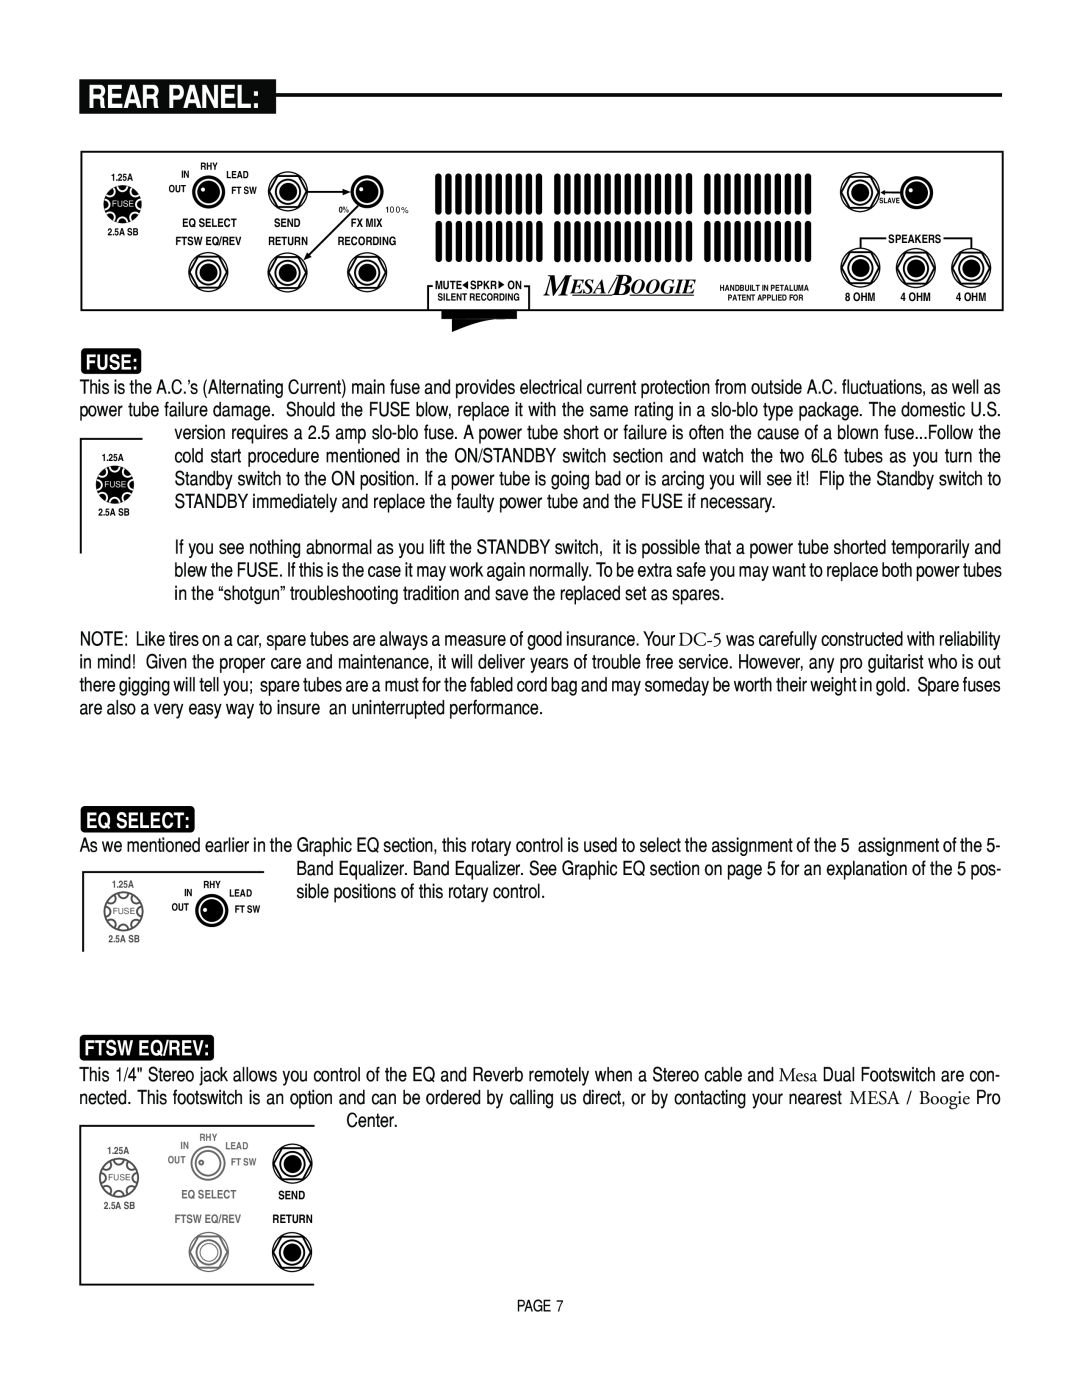 Mesa/Boogie DC5 manual Fuse, Eq Select, Ftsw Eq/Rev, Rear Panel, sible positions of this rotary control 